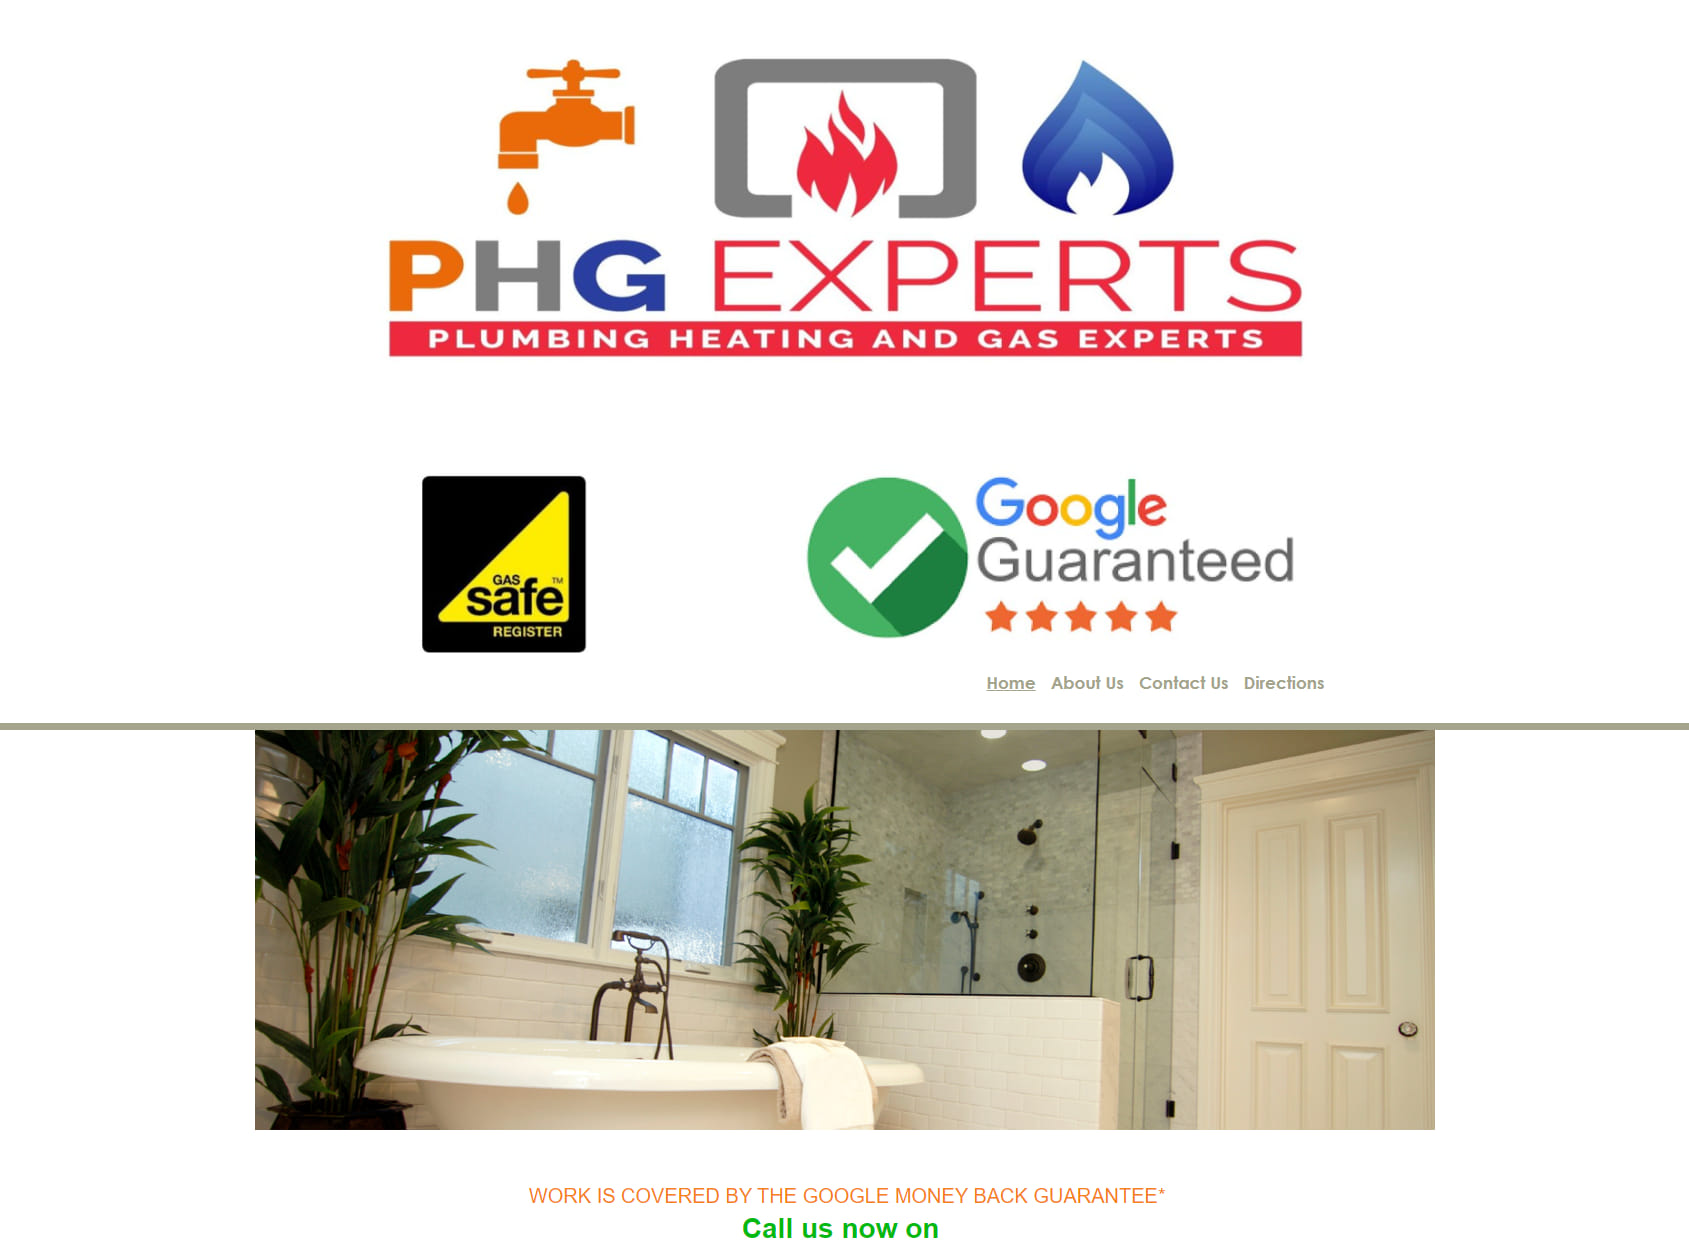 Plumbing Heating and Gas Experts Ltd